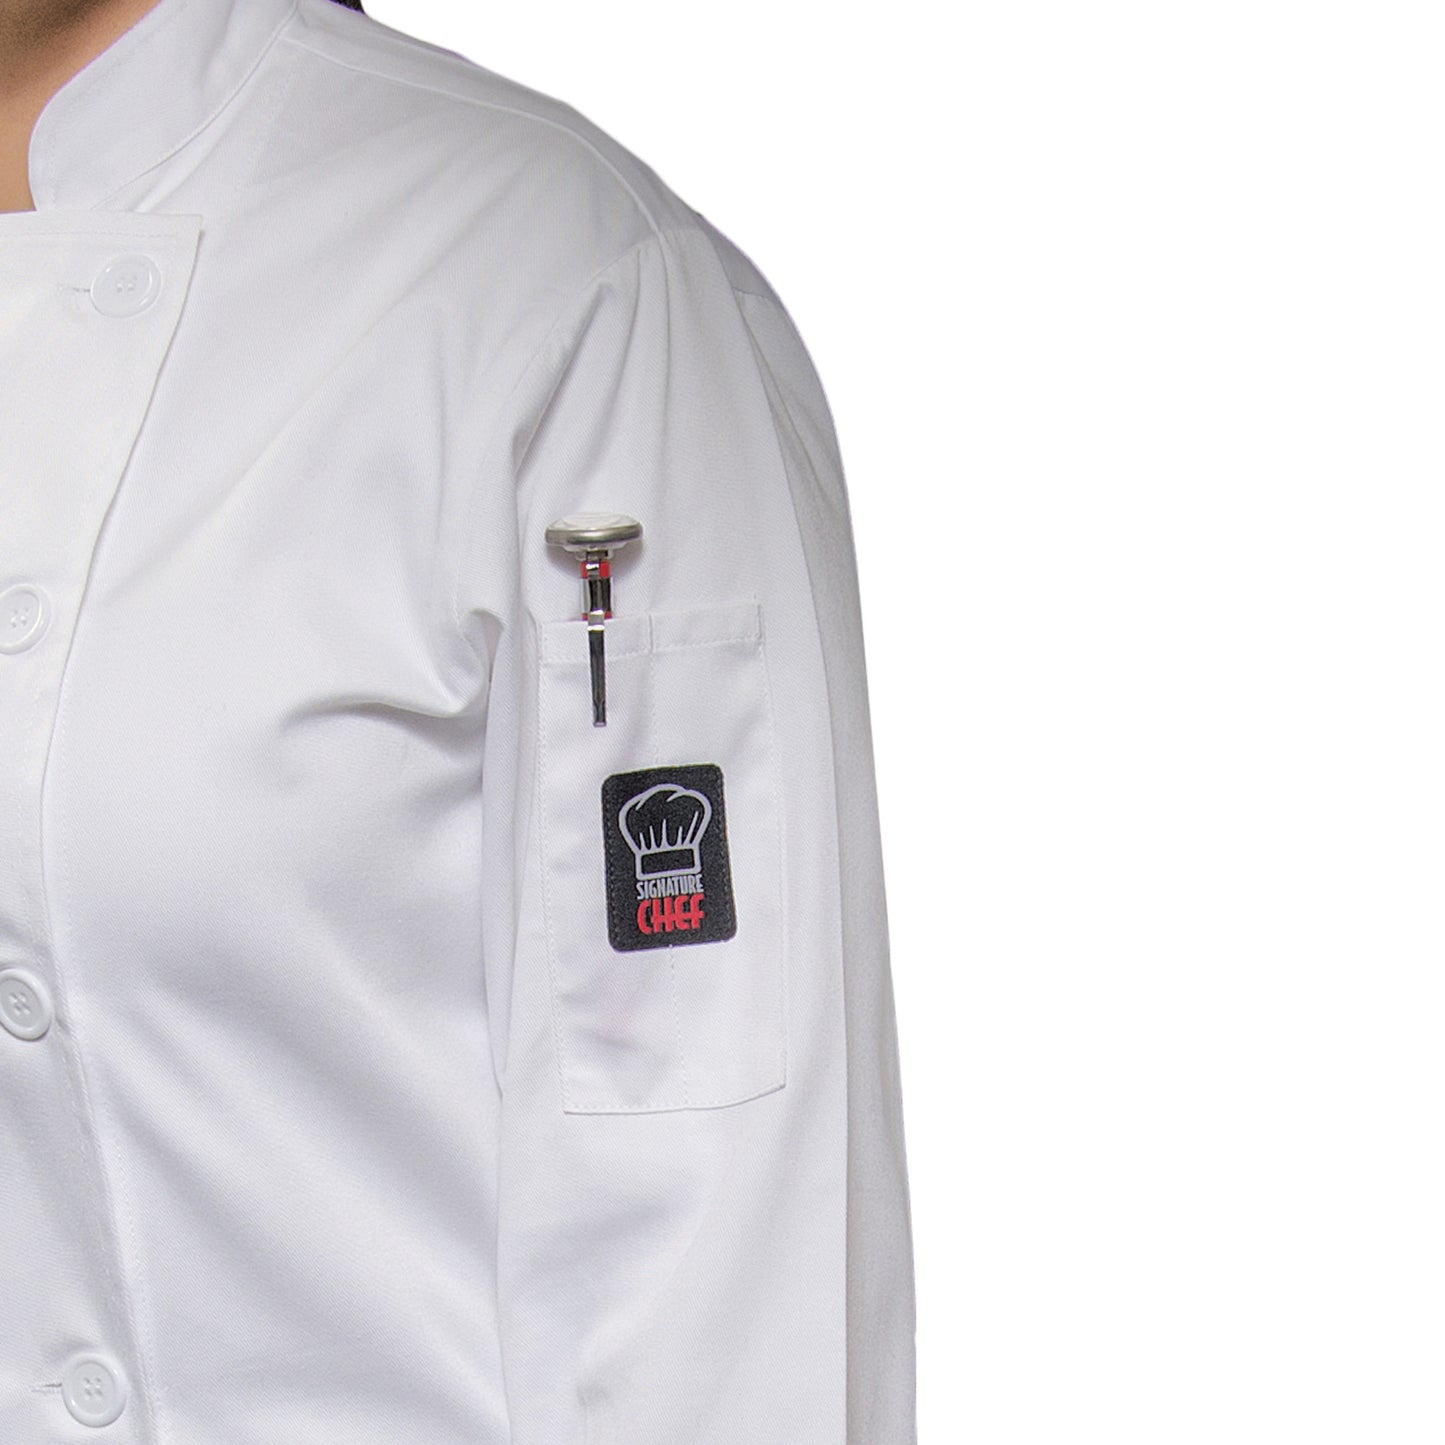 UNF-7WS - Women's Tapered Fit Chef Jacket